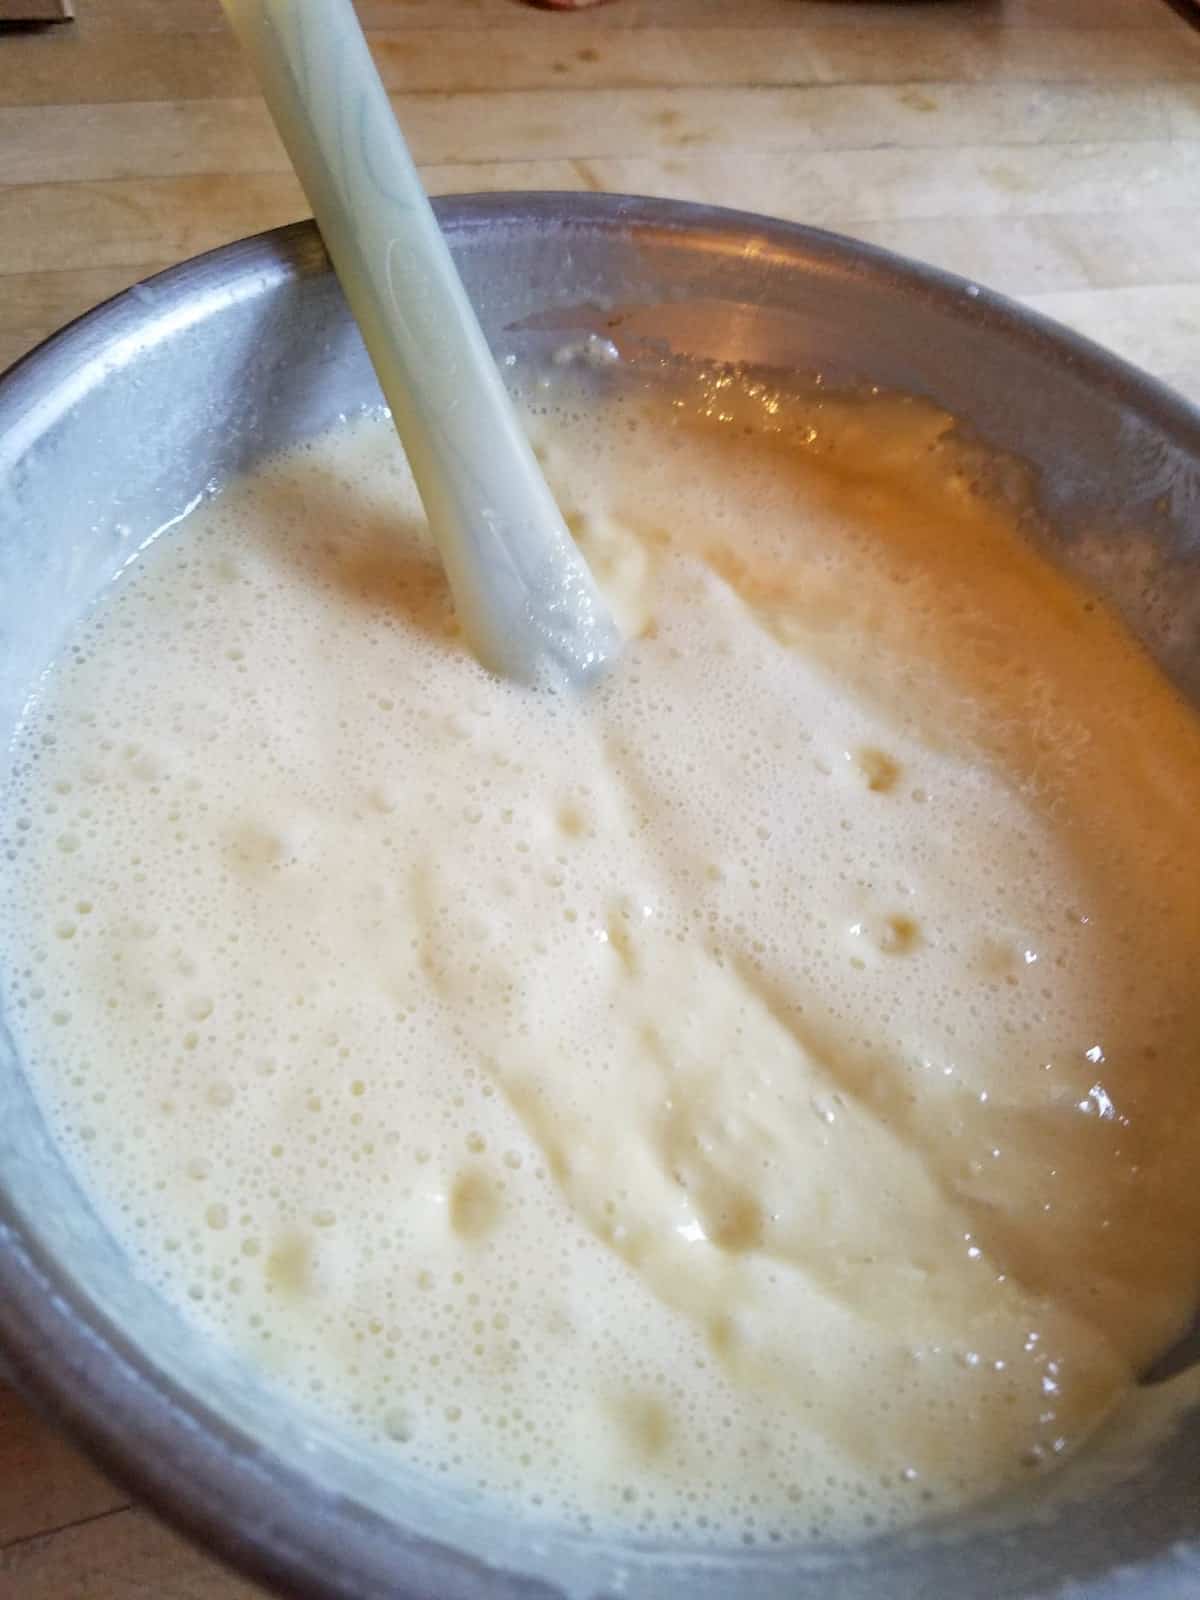 Cake Batter in a Stainless Bowl with Spatula